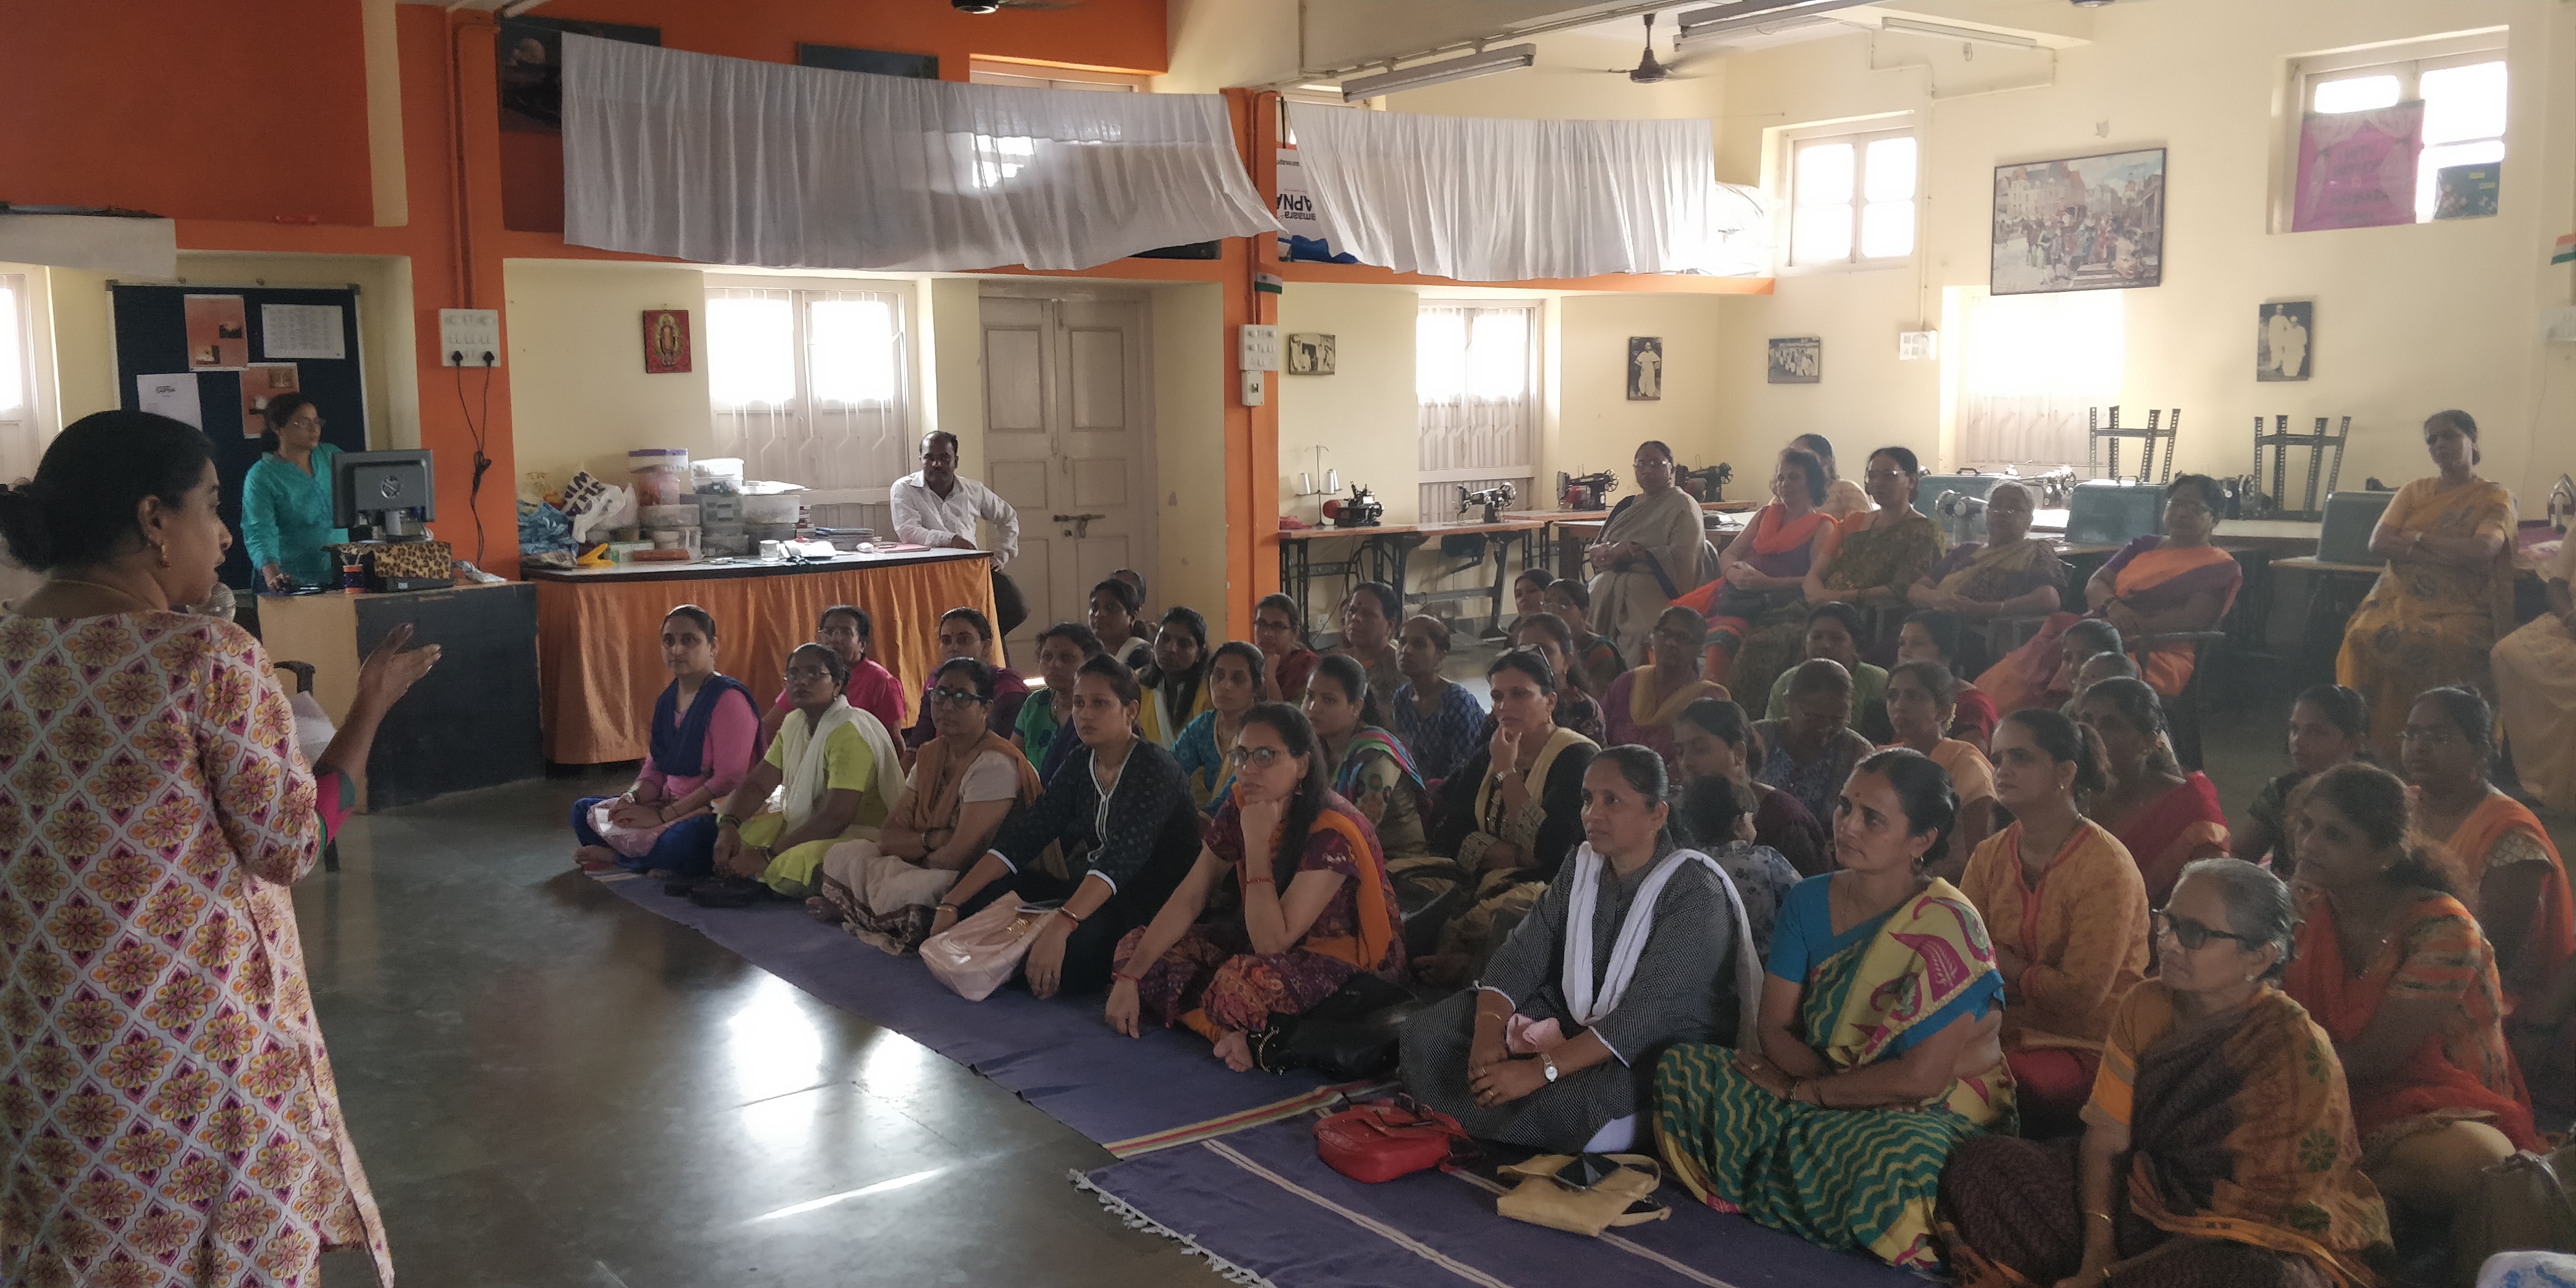 All the beneficiaries learnt so much from Ms. Nair. It was a very informative session.